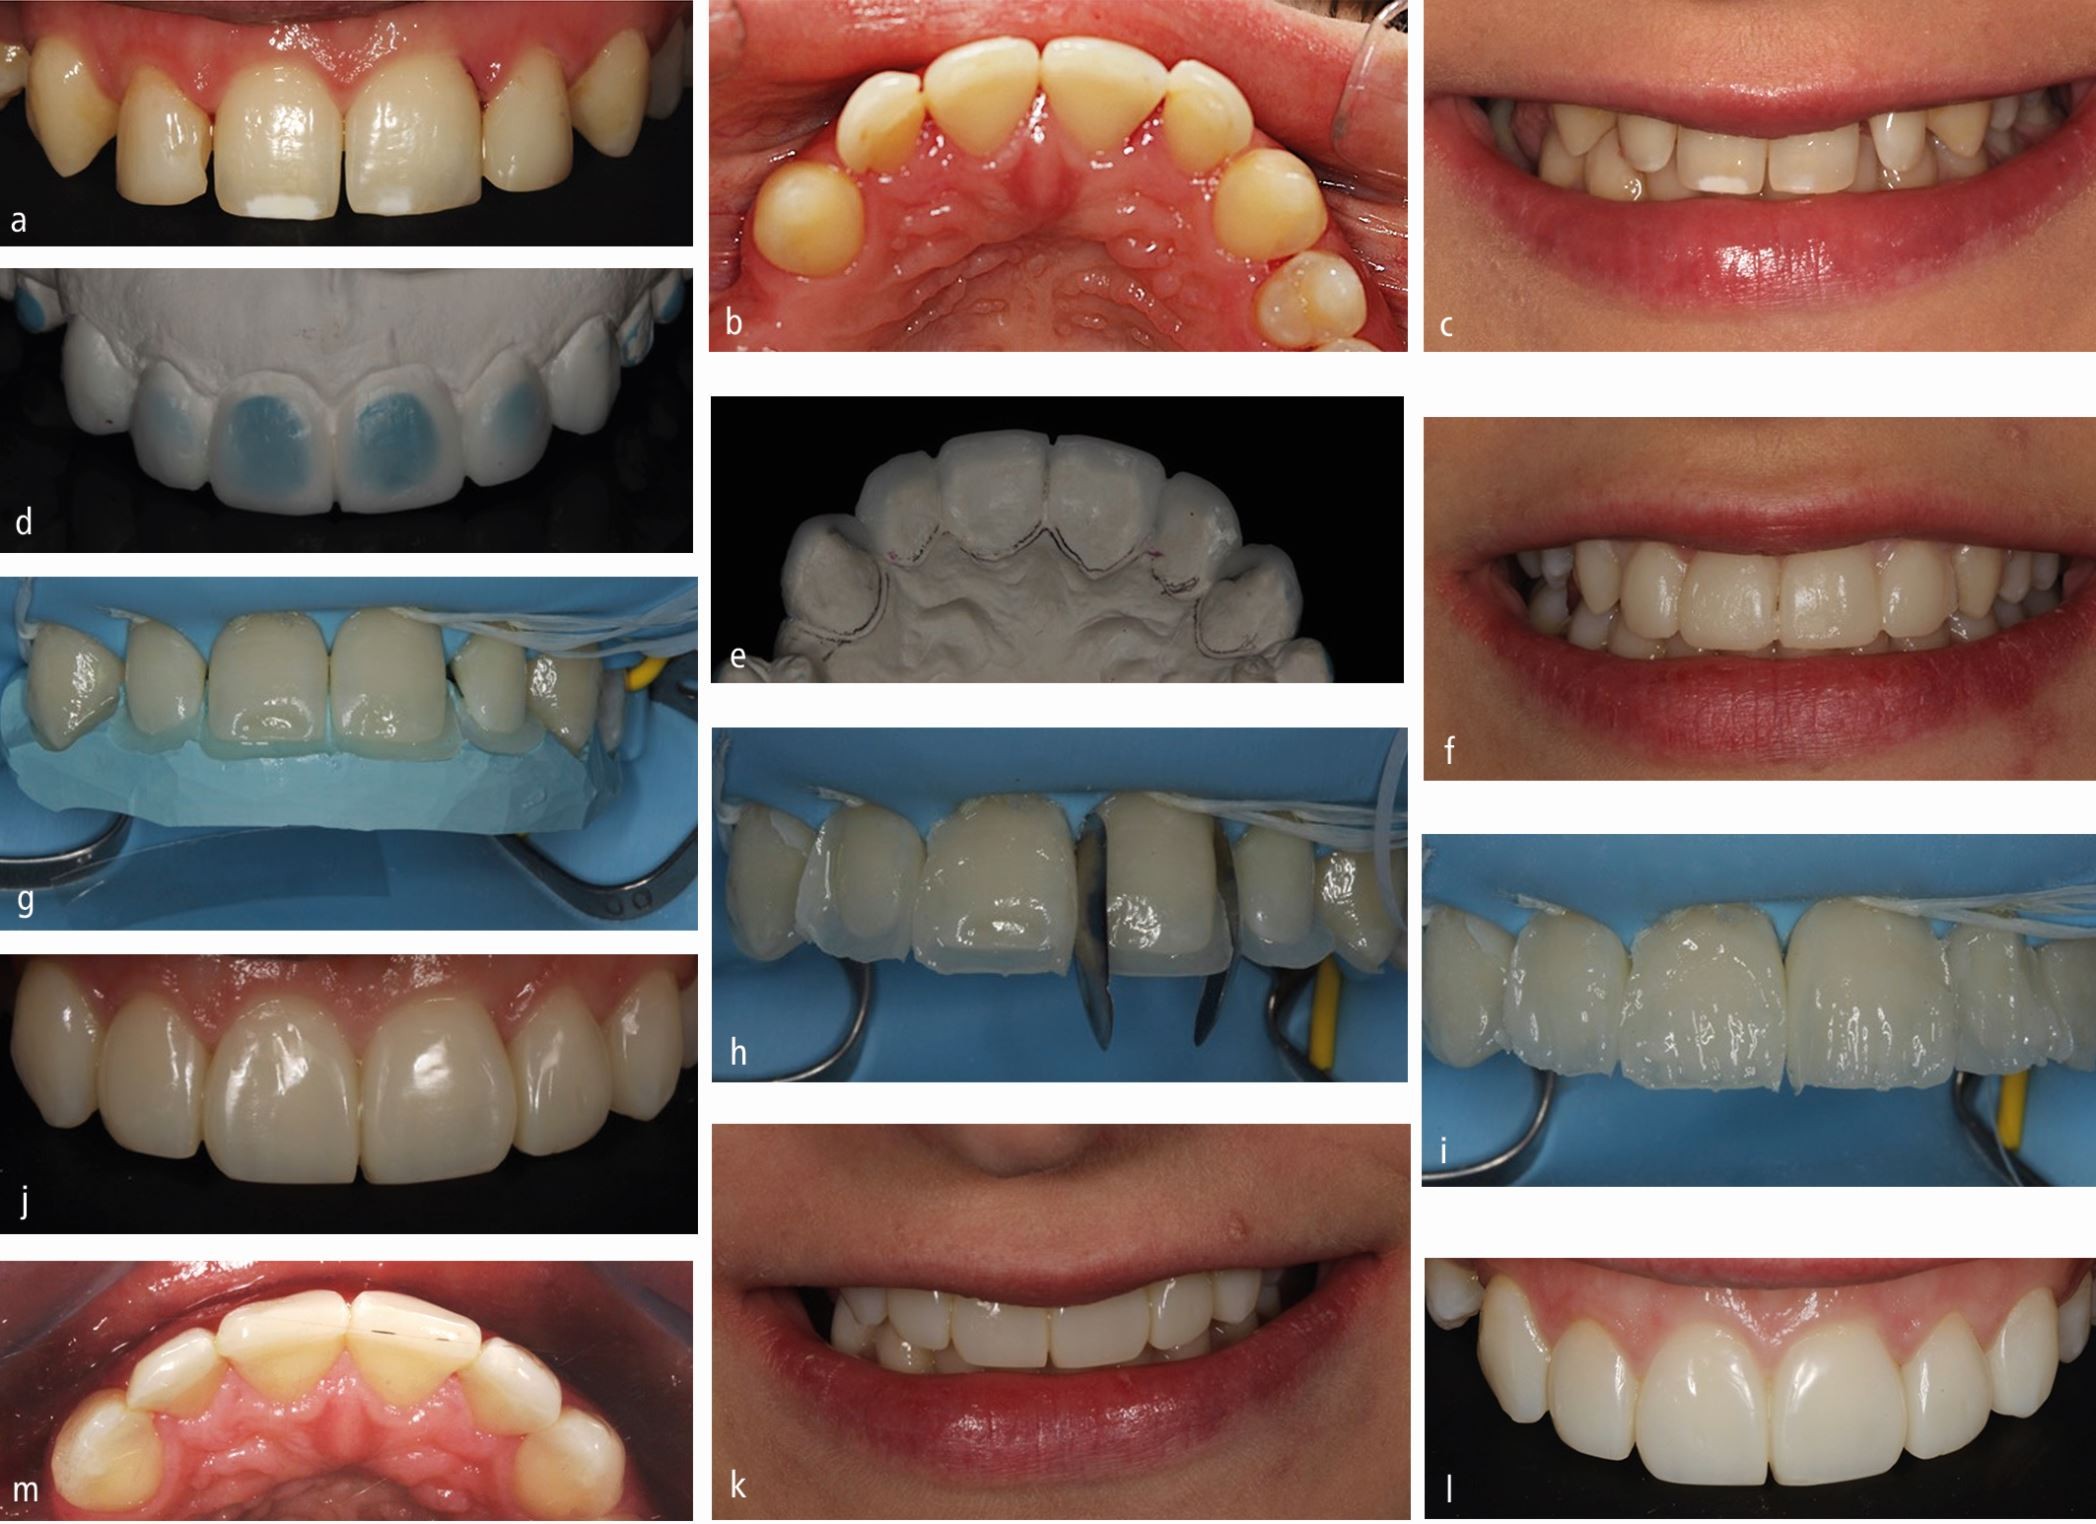 d: After light curing of composite resin over teeth.